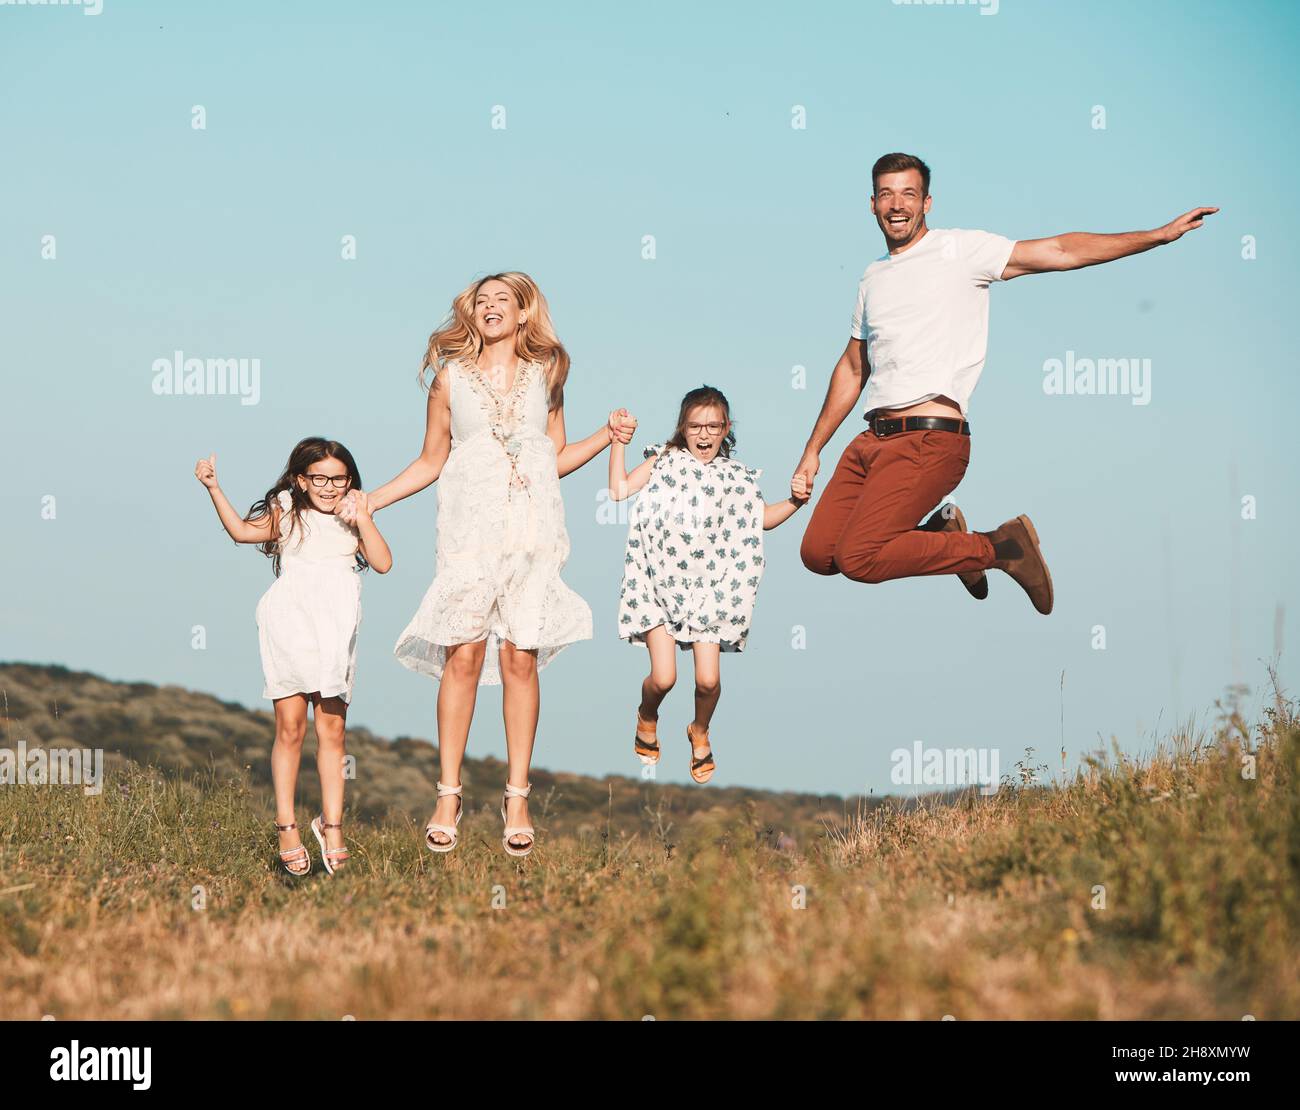 child family outdoor mother woman father girl happy happiness lifestyle having fun bonding jumping Stock Photo